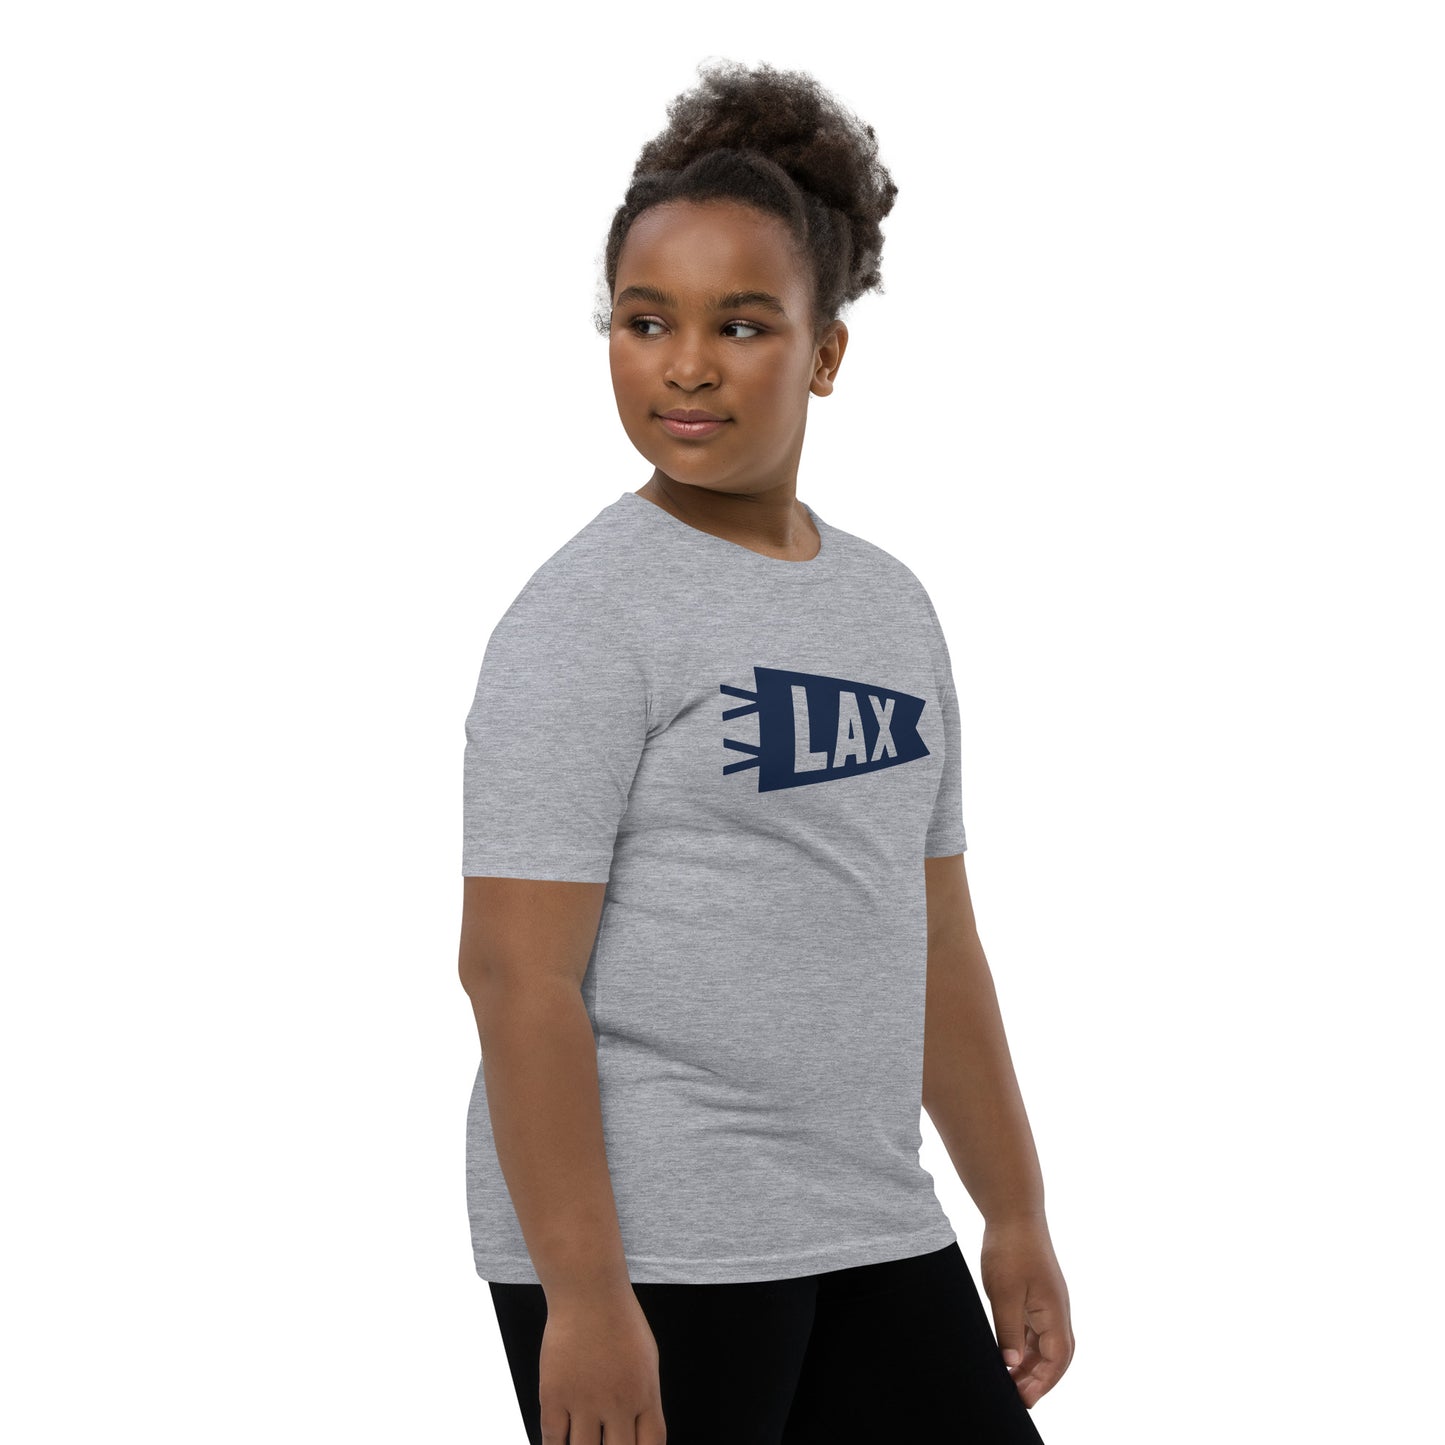 Kid's Airport Code Tee - Navy Blue Graphic • LAX Los Angeles • YHM Designs - Image 03